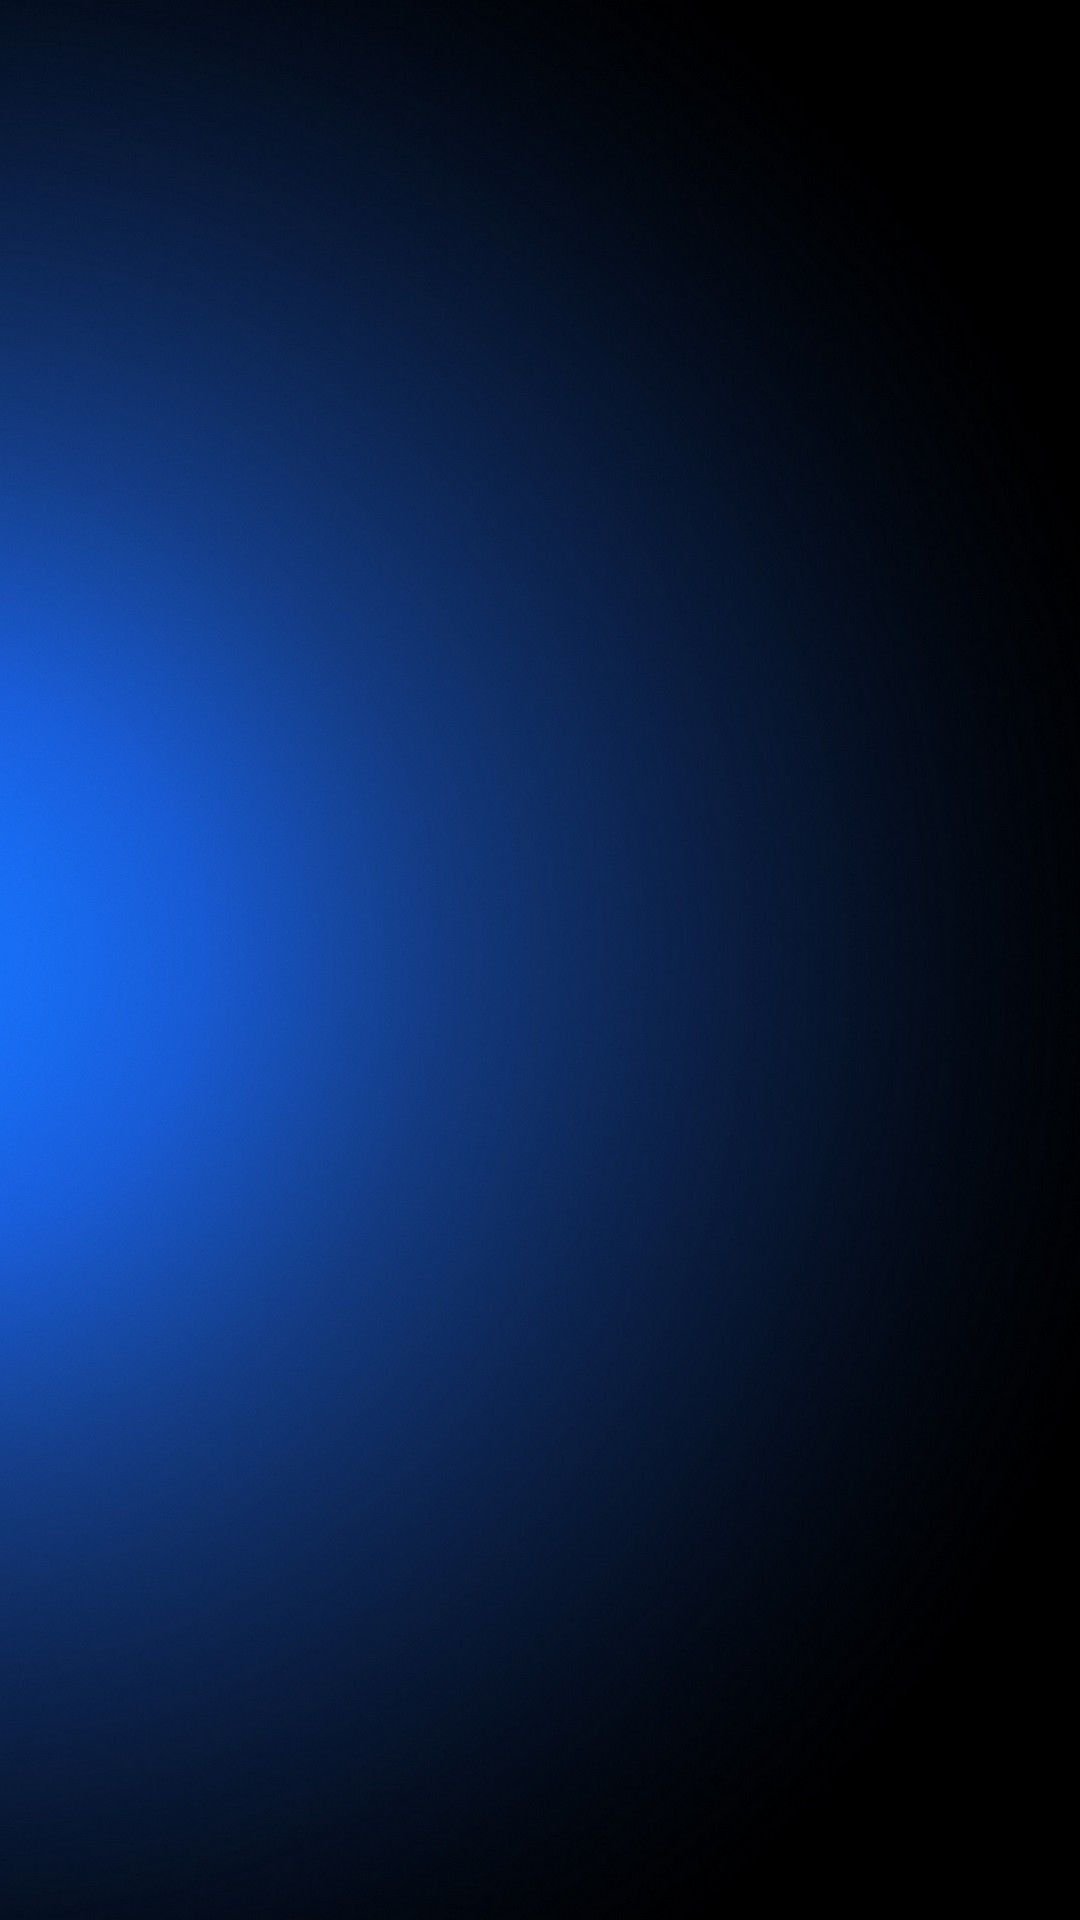 6 cool blue gradient wallpapers for iPhone in 2023